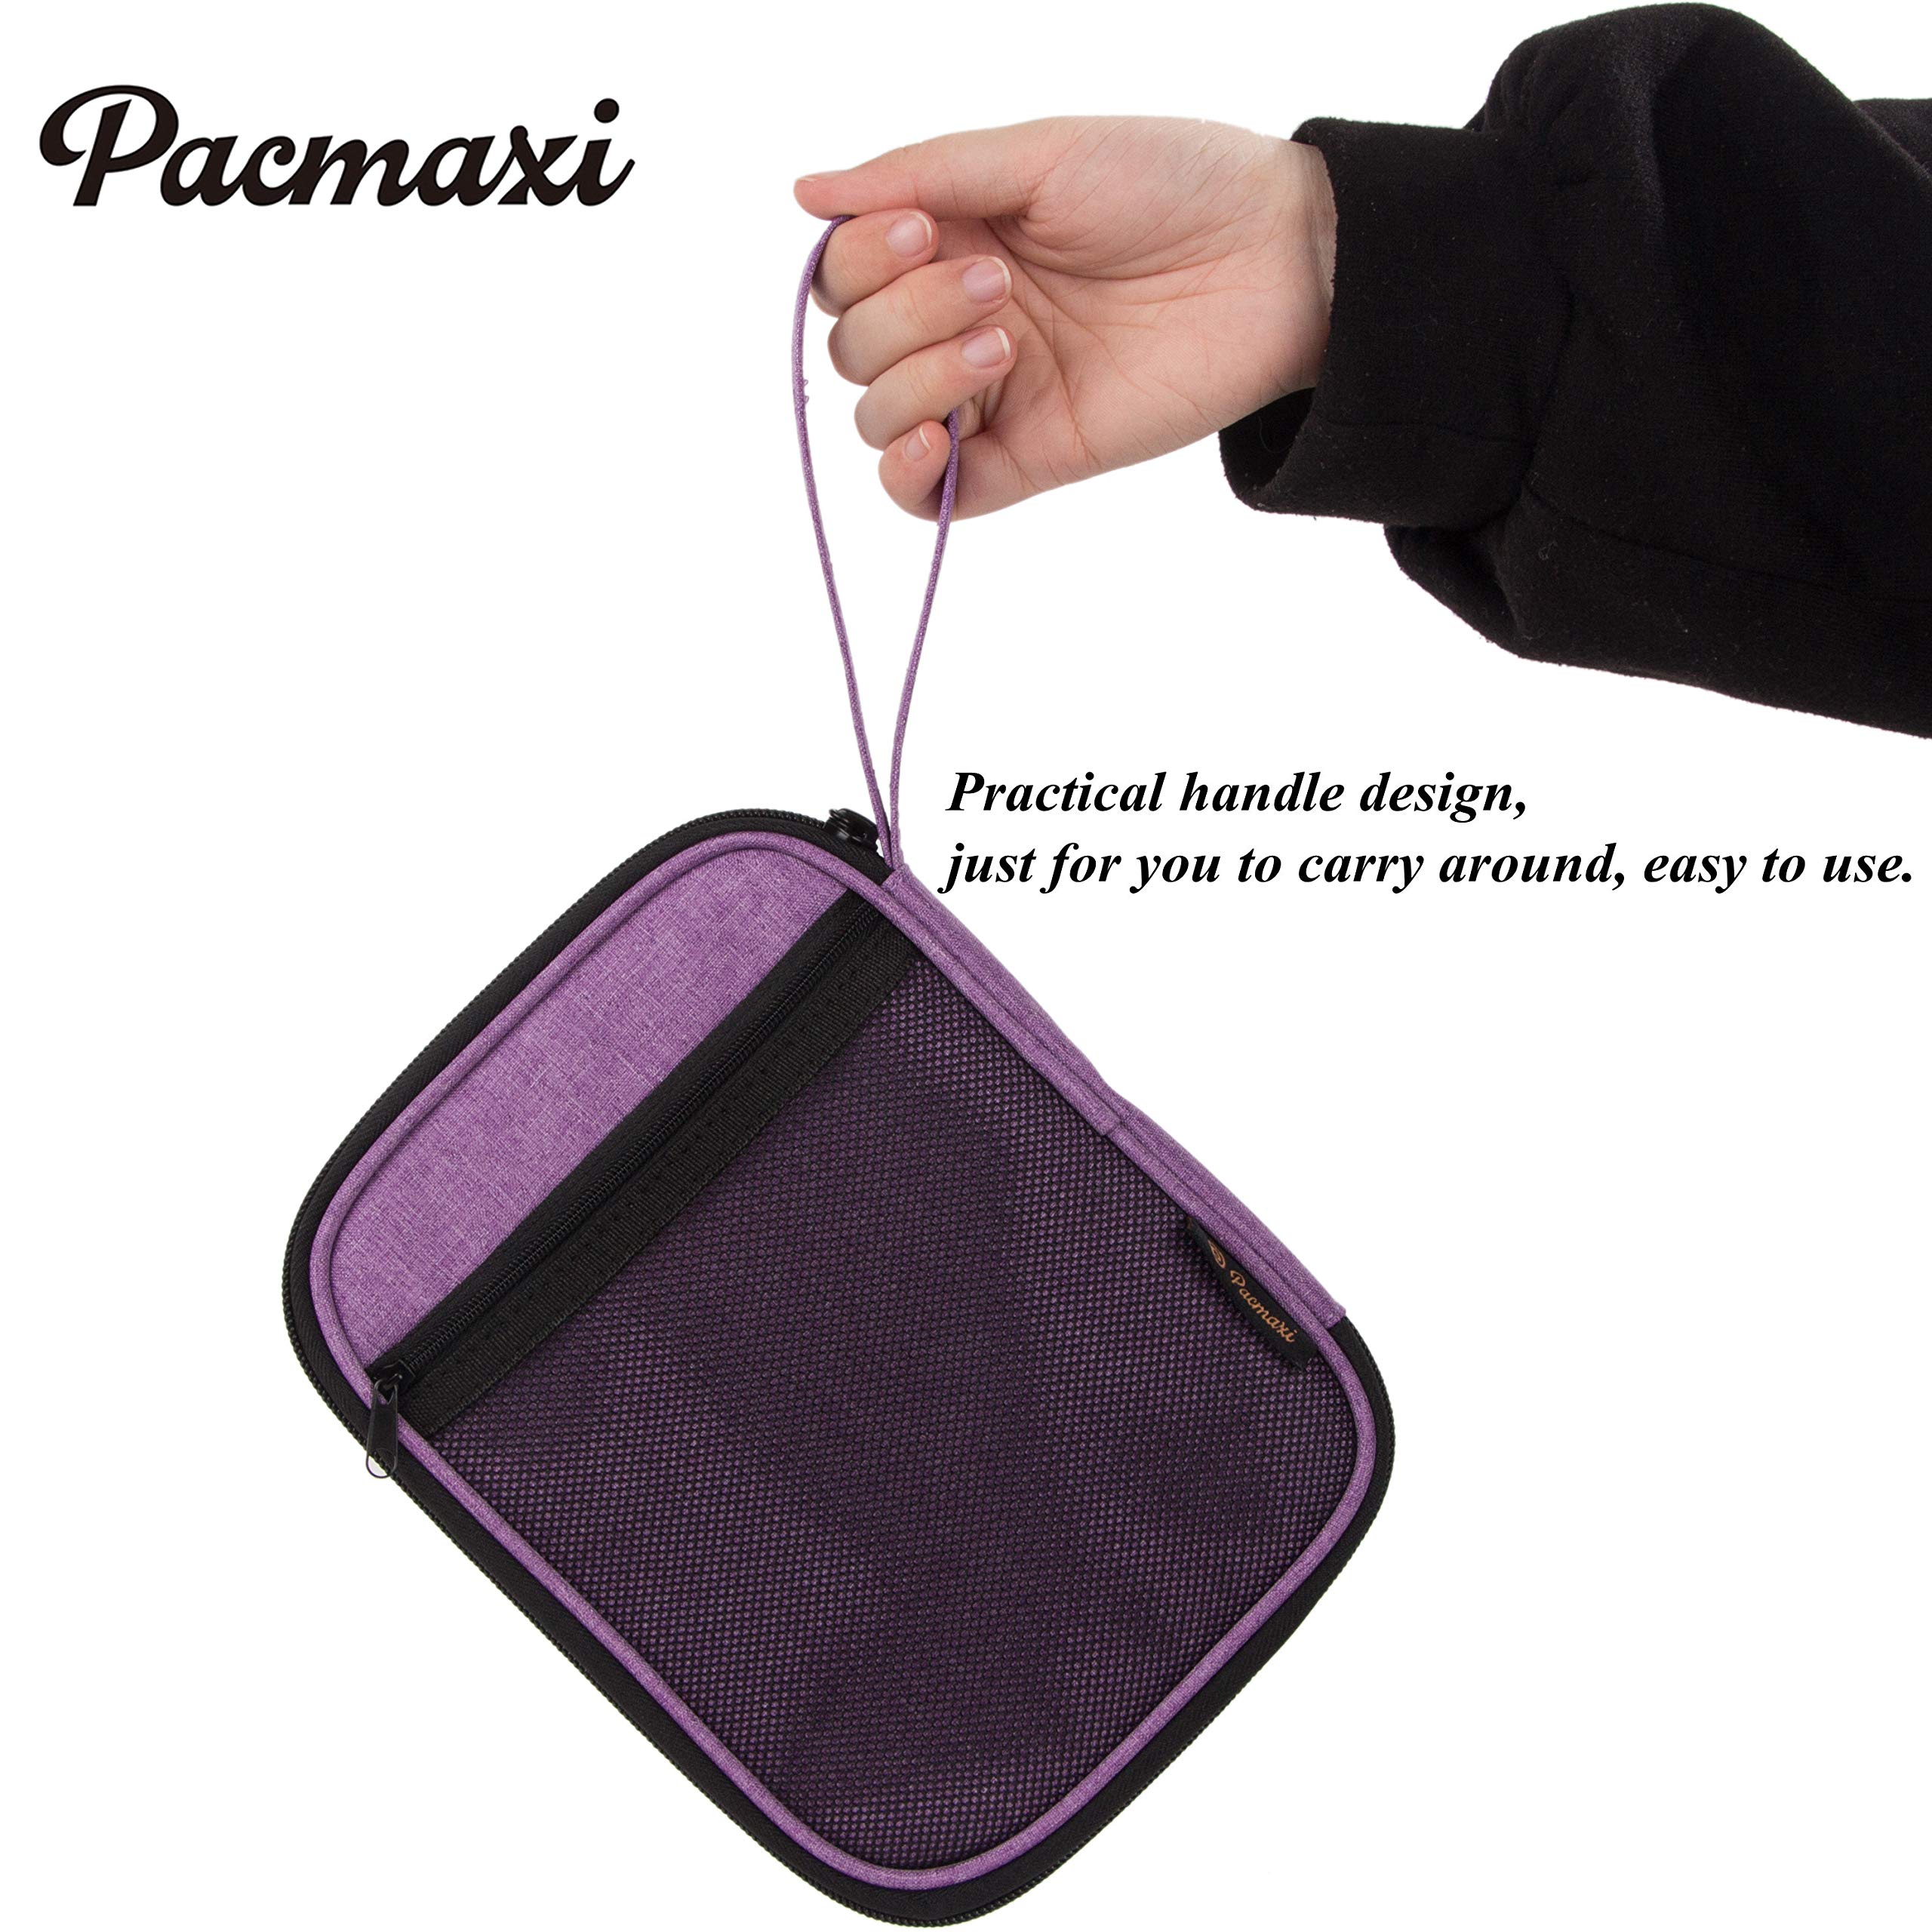 PACMAXI Watch Band Storage Organizer Holds 10 Watch Bands, Travel Watch Straps Carrying Case, Watch Band Storage Bag, (purple)